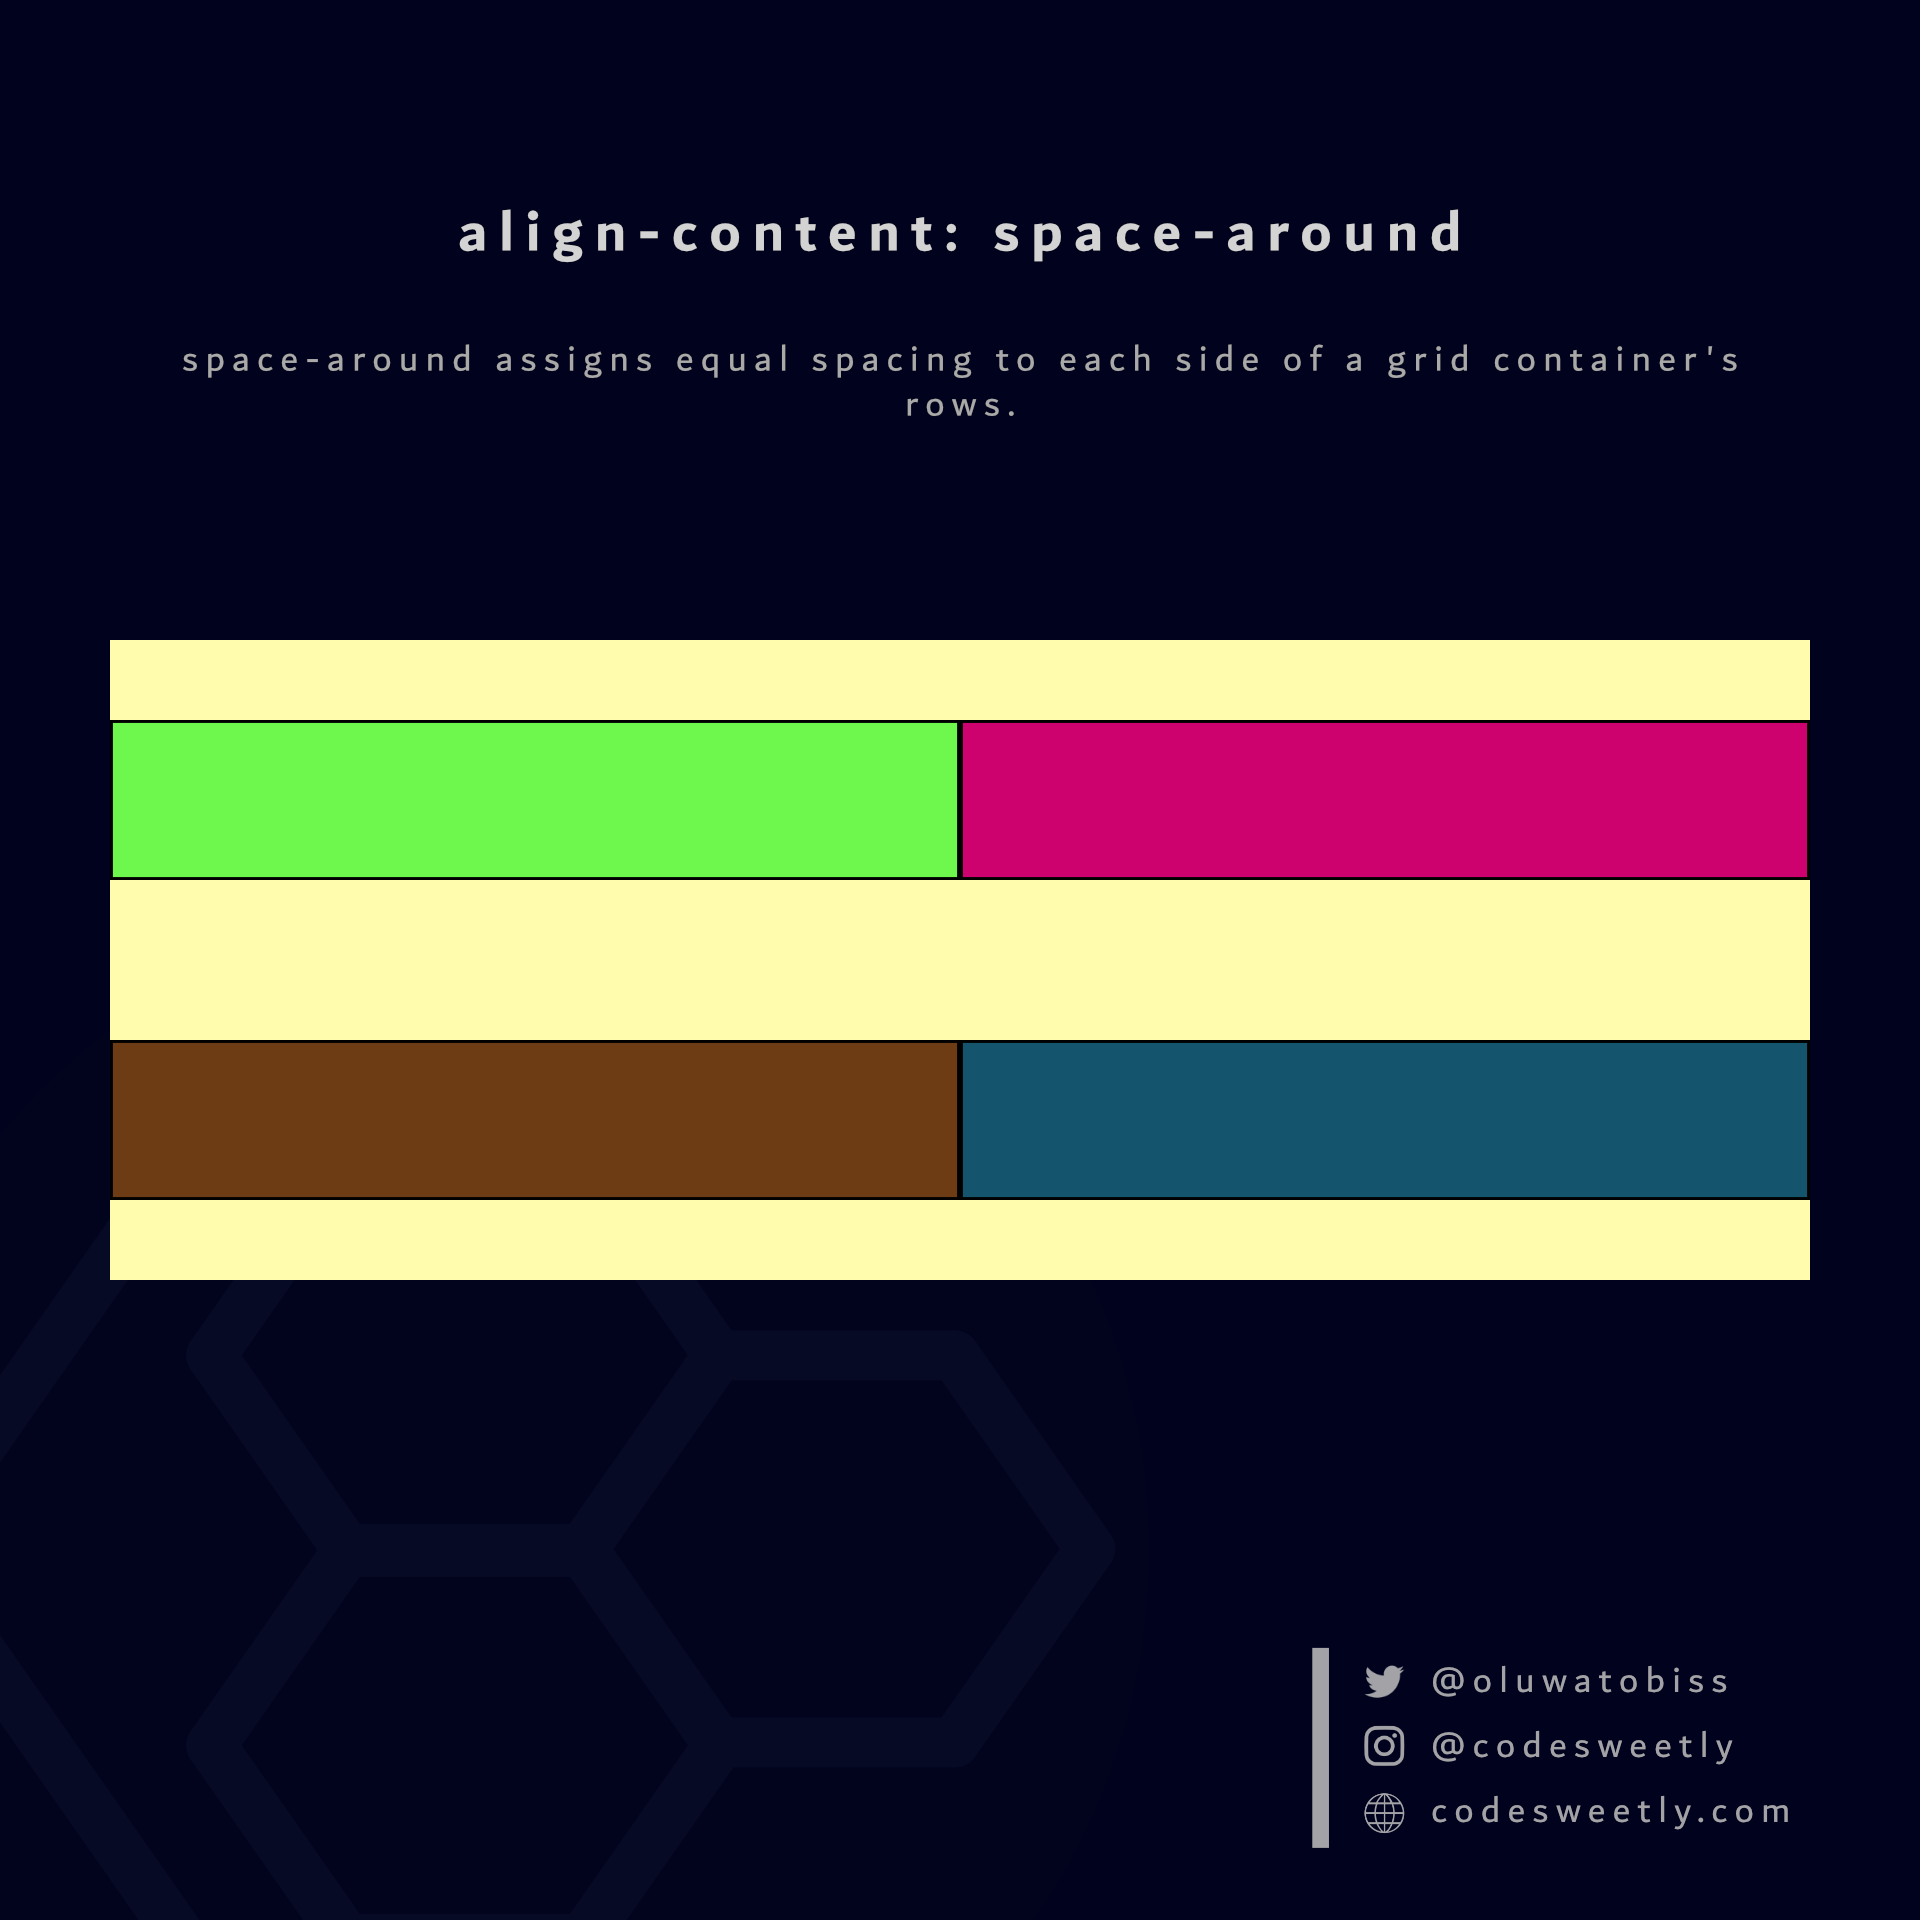 Illustration of align-content&#39;s space-around value in CSS
Grid